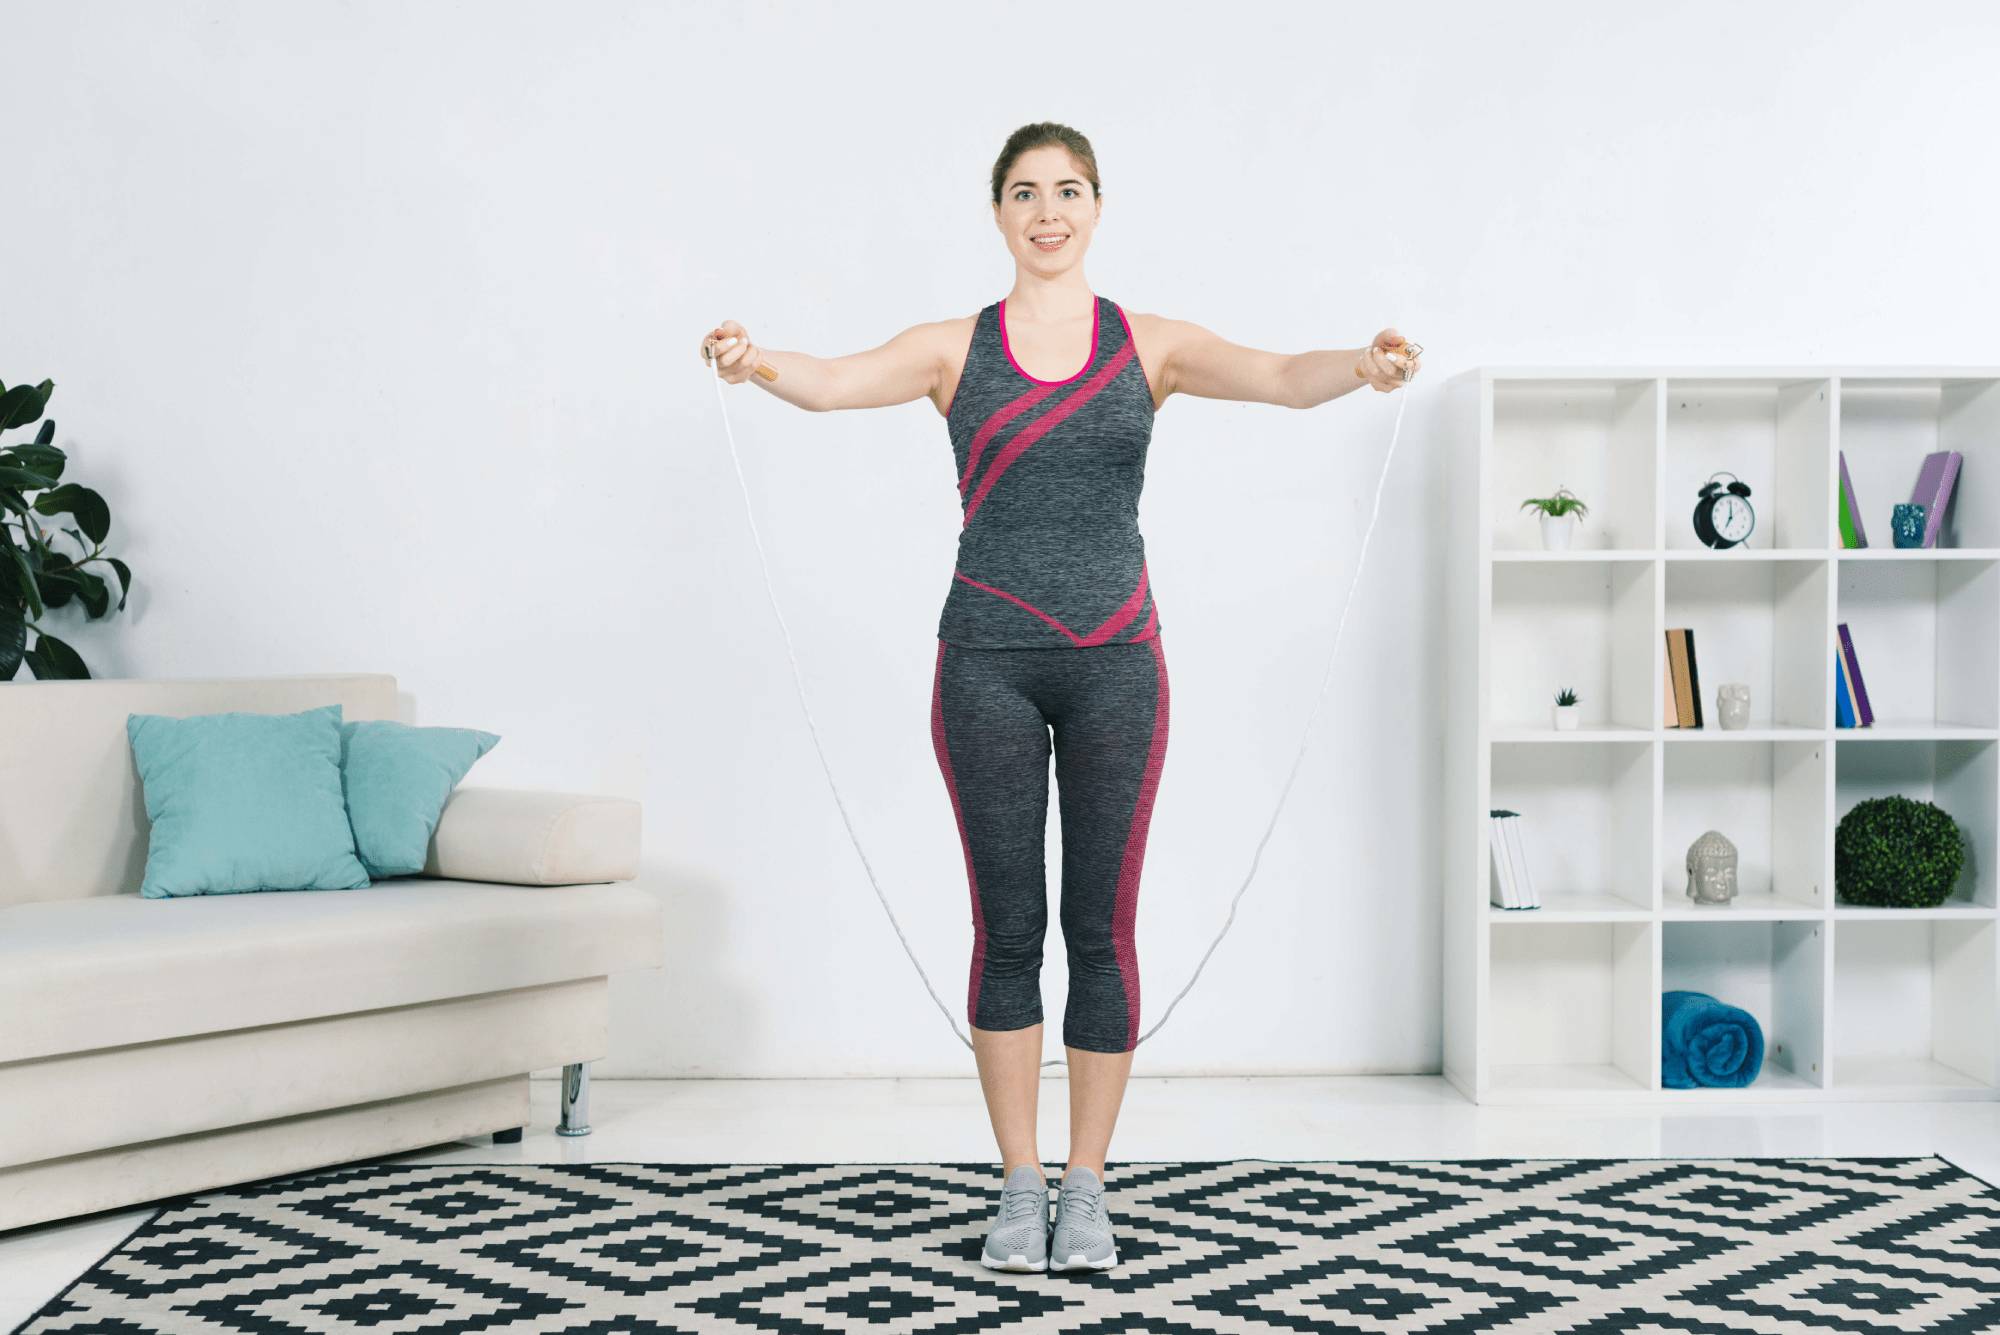 10 Easy Exercises You Can Do at Home